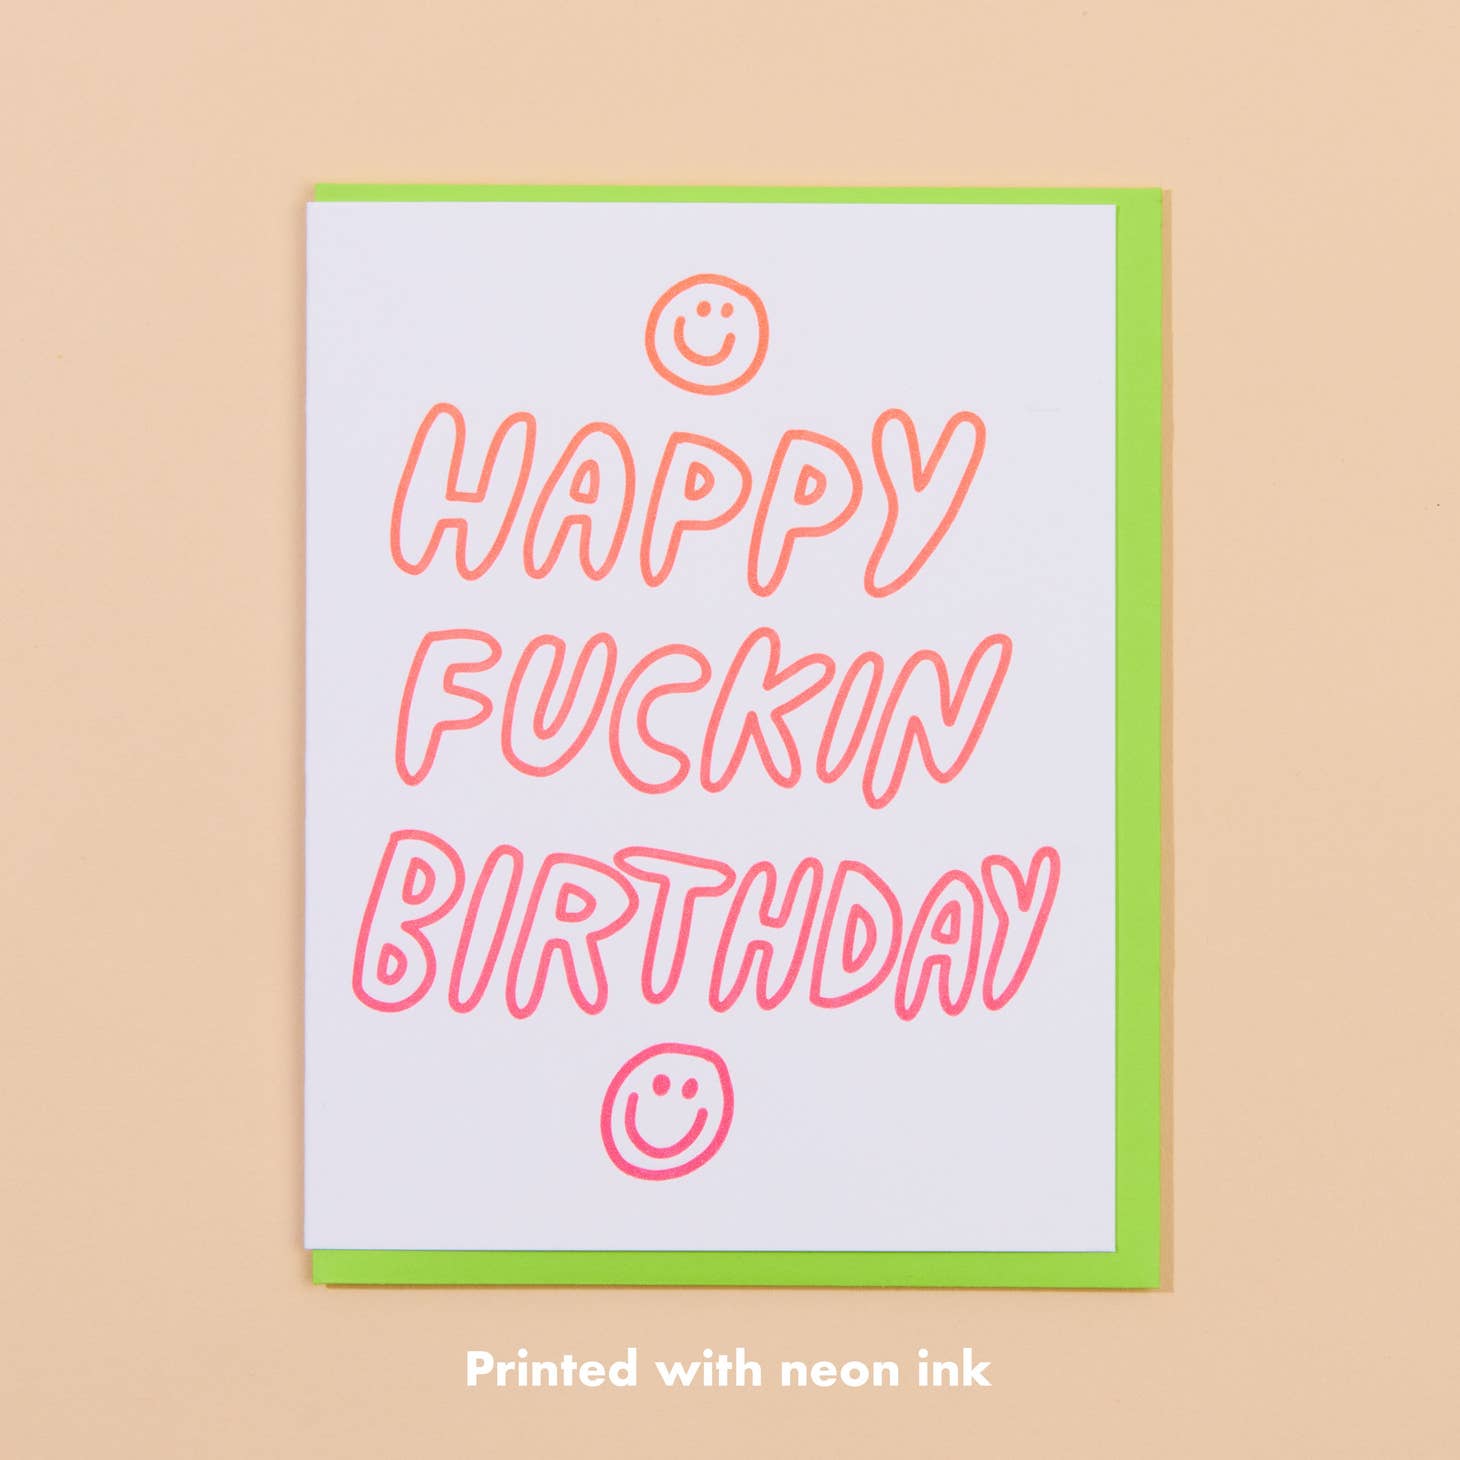 White card with orange ombre text saying “Happy Fuckin Birthday” with two images of smiling face emojis. Bright green envelope included.   